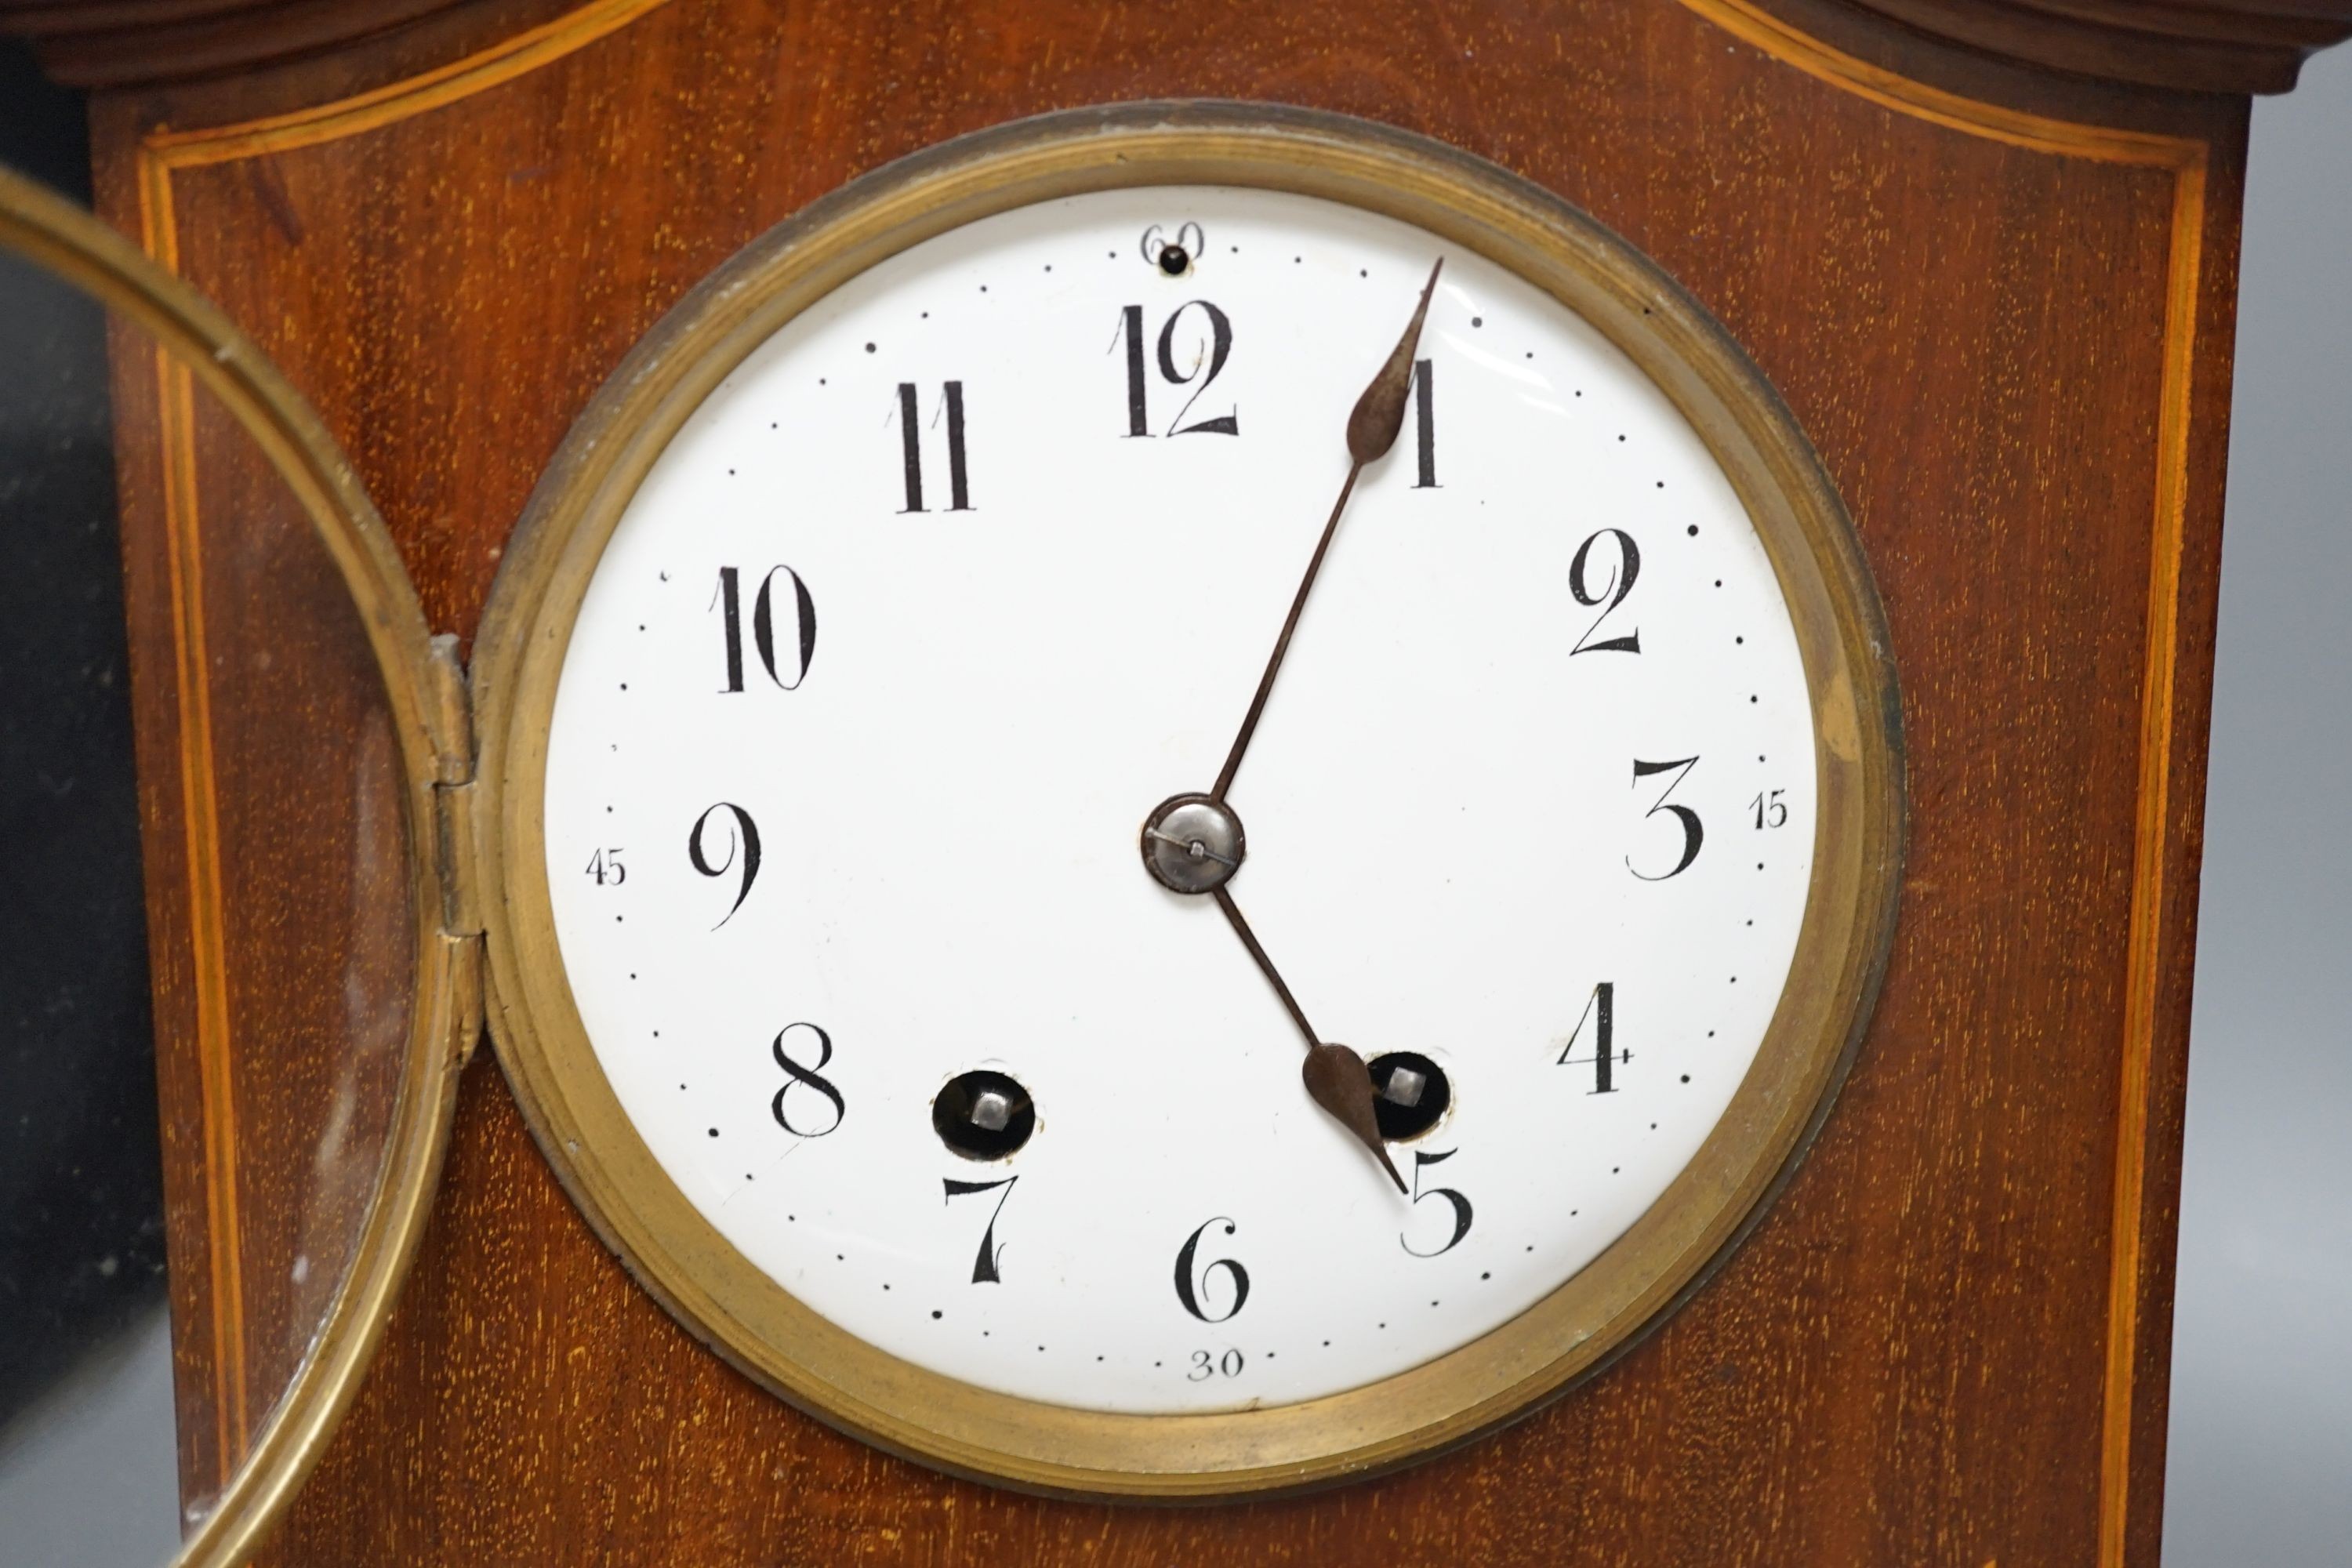 An Edwardian inlaid mahogany mantel clock with French gong-striking movement, 39cm.